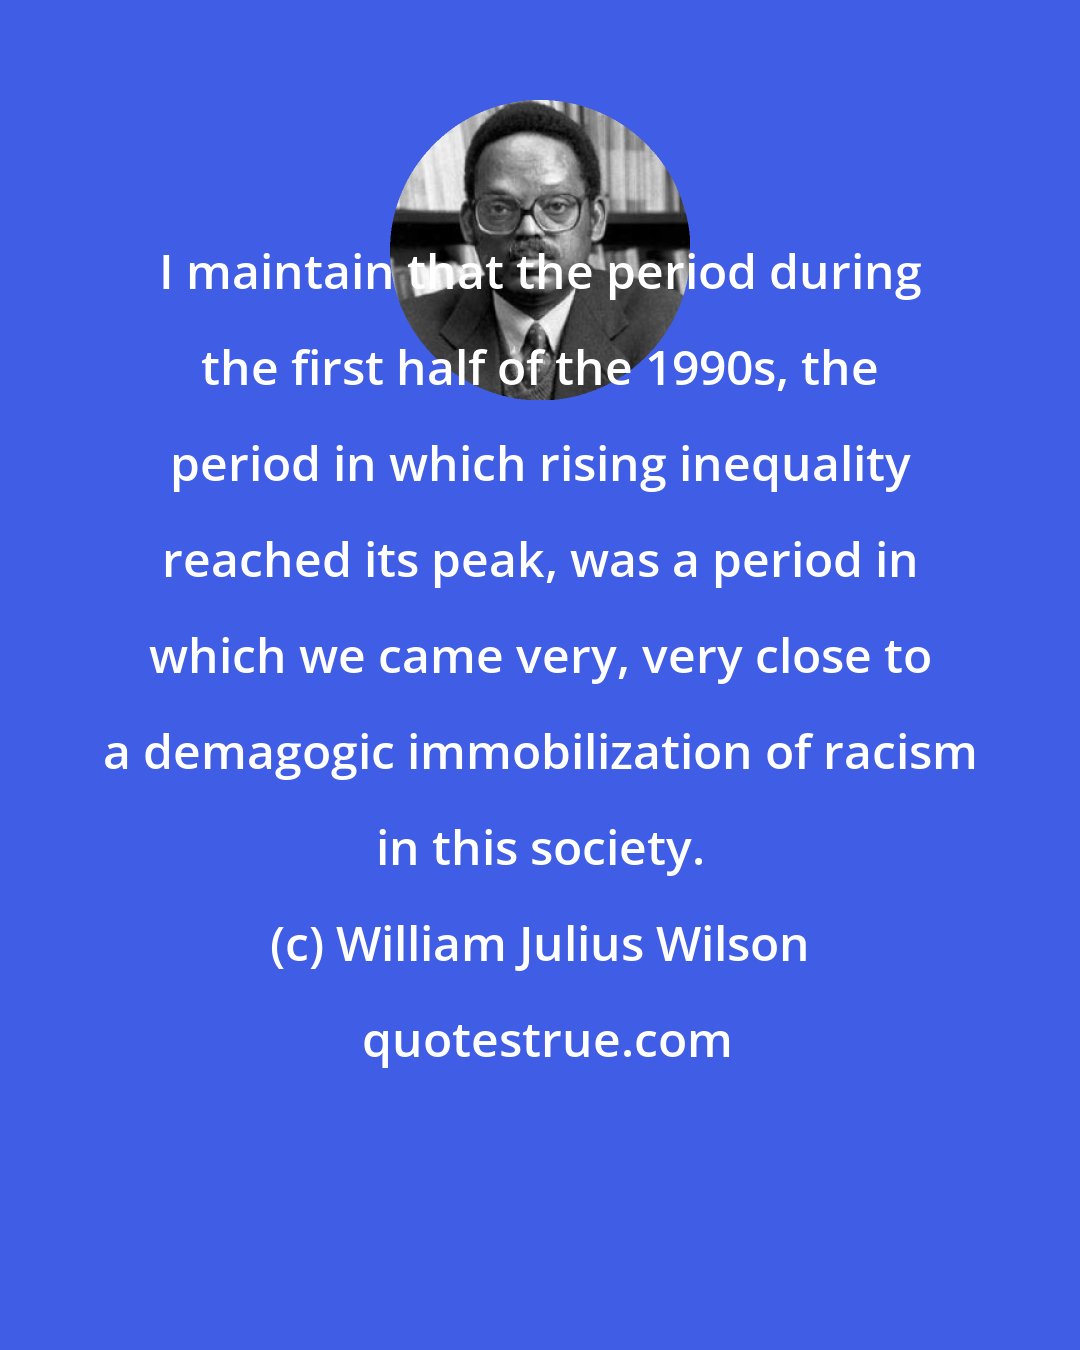 William Julius Wilson: I maintain that the period during the first half of the 1990s, the period in which rising inequality reached its peak, was a period in which we came very, very close to a demagogic immobilization of racism in this society.